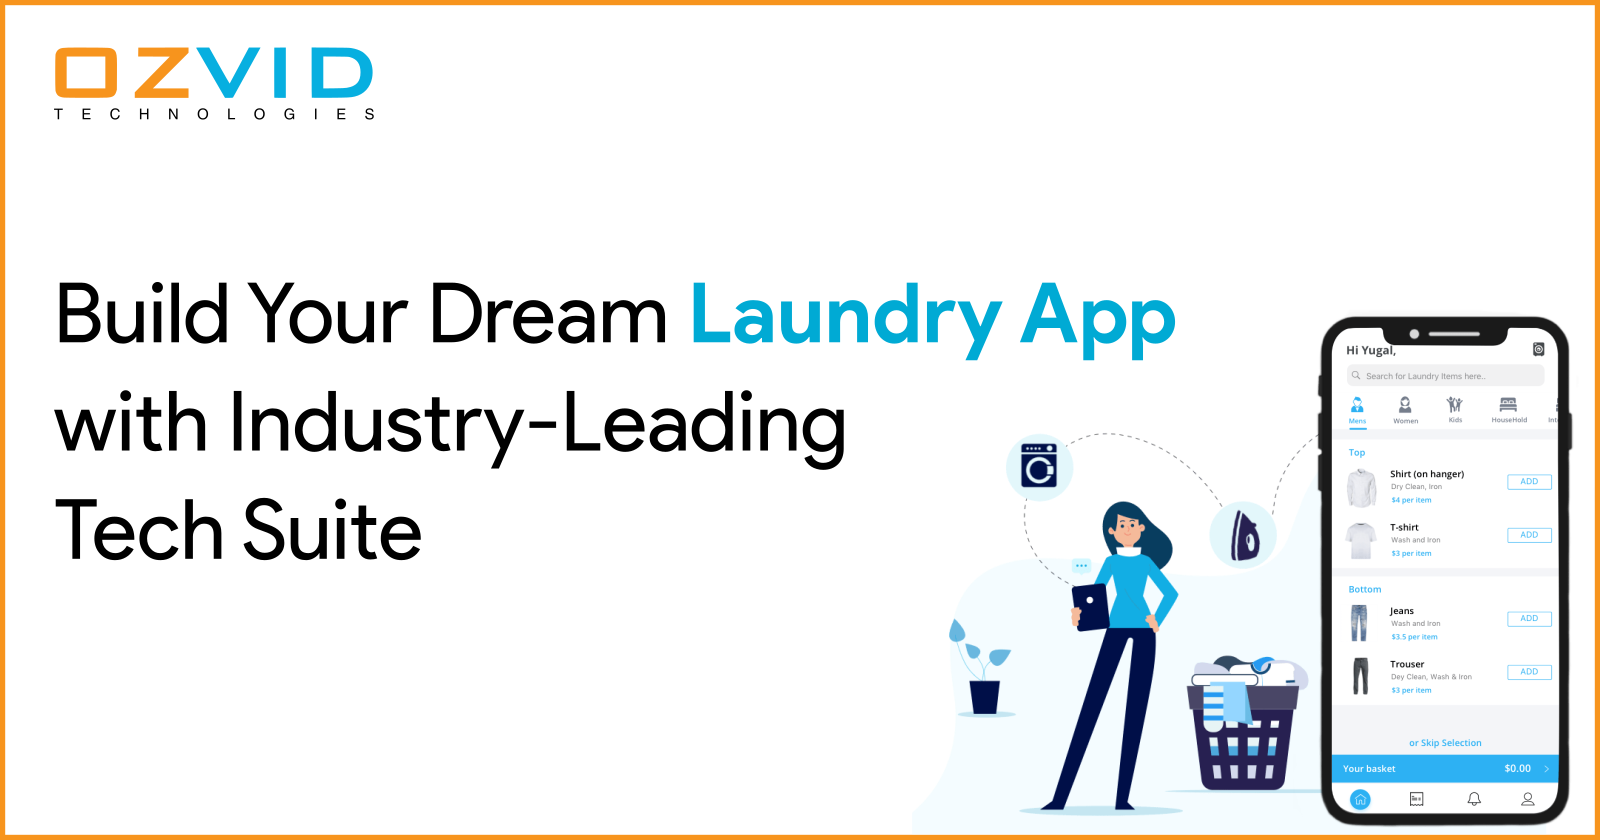 Build Your Dream Laundry App with Industry-Leading Tech Suite